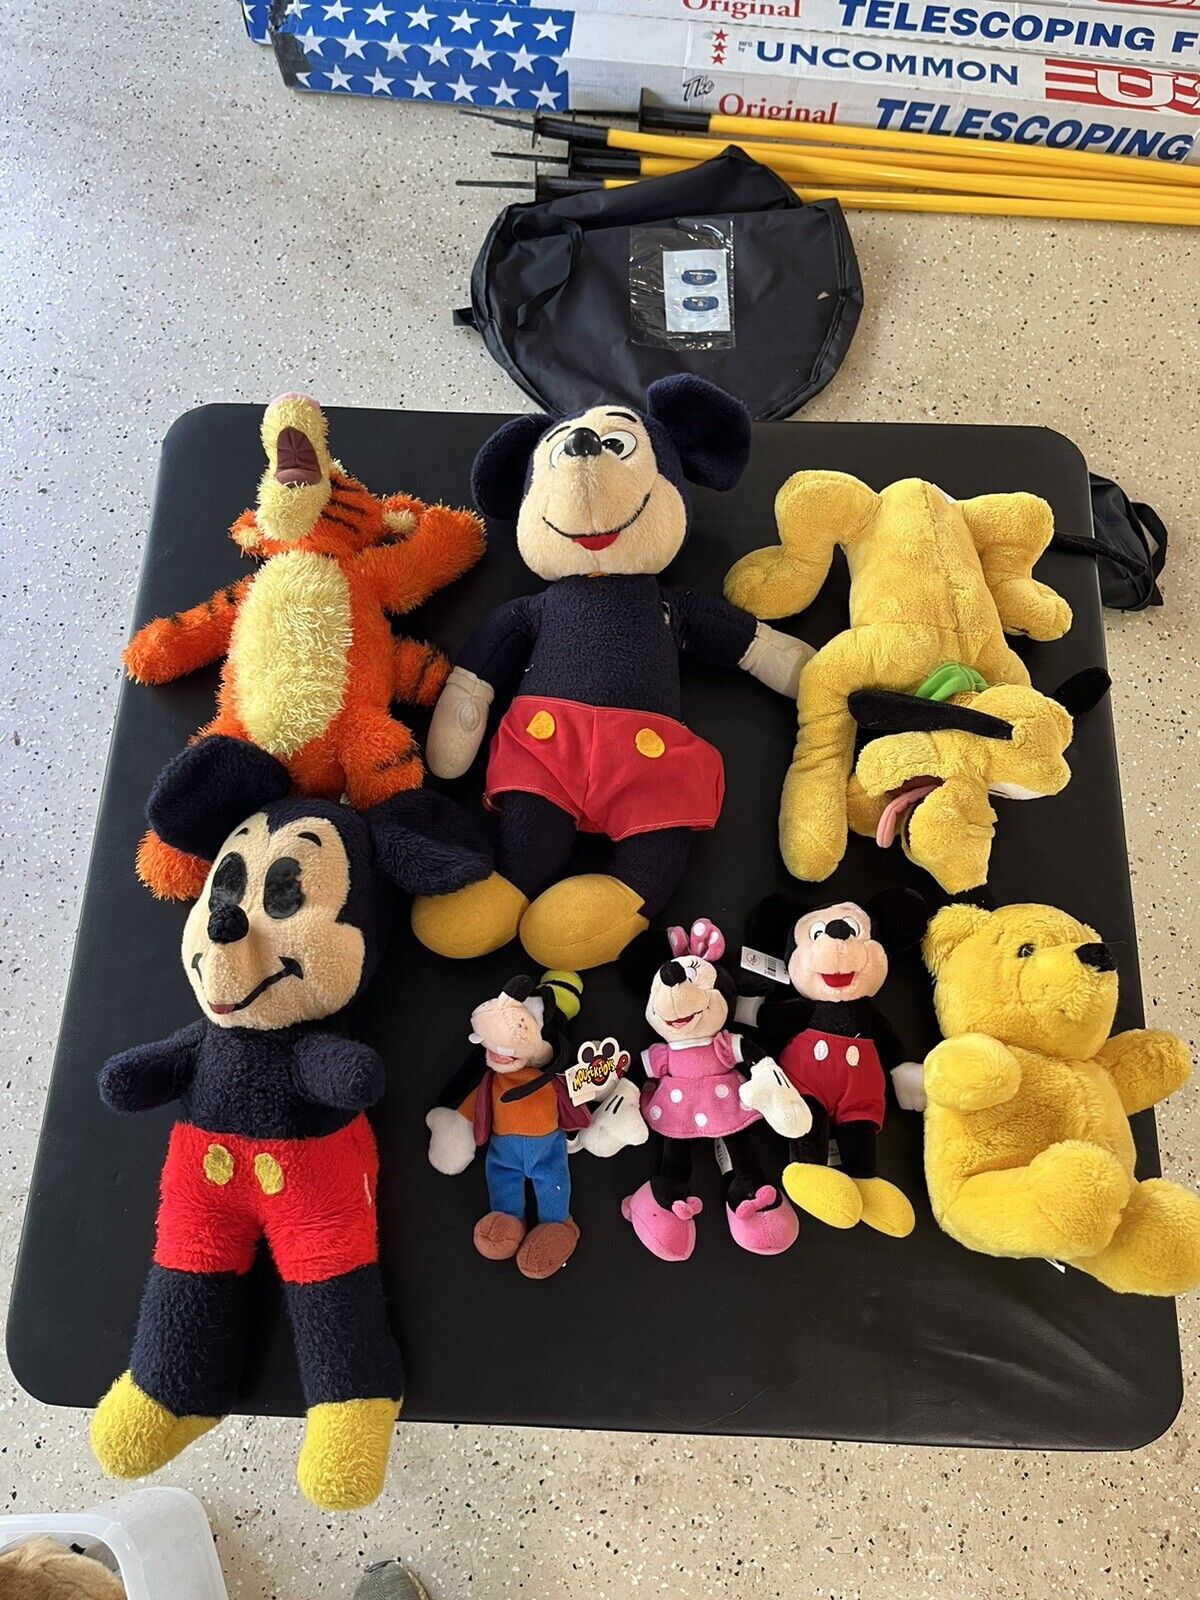 Collectable Disney Plush Toy Lot Of 8 Mickey Minnie Mouse Pooh Tigger Goofy